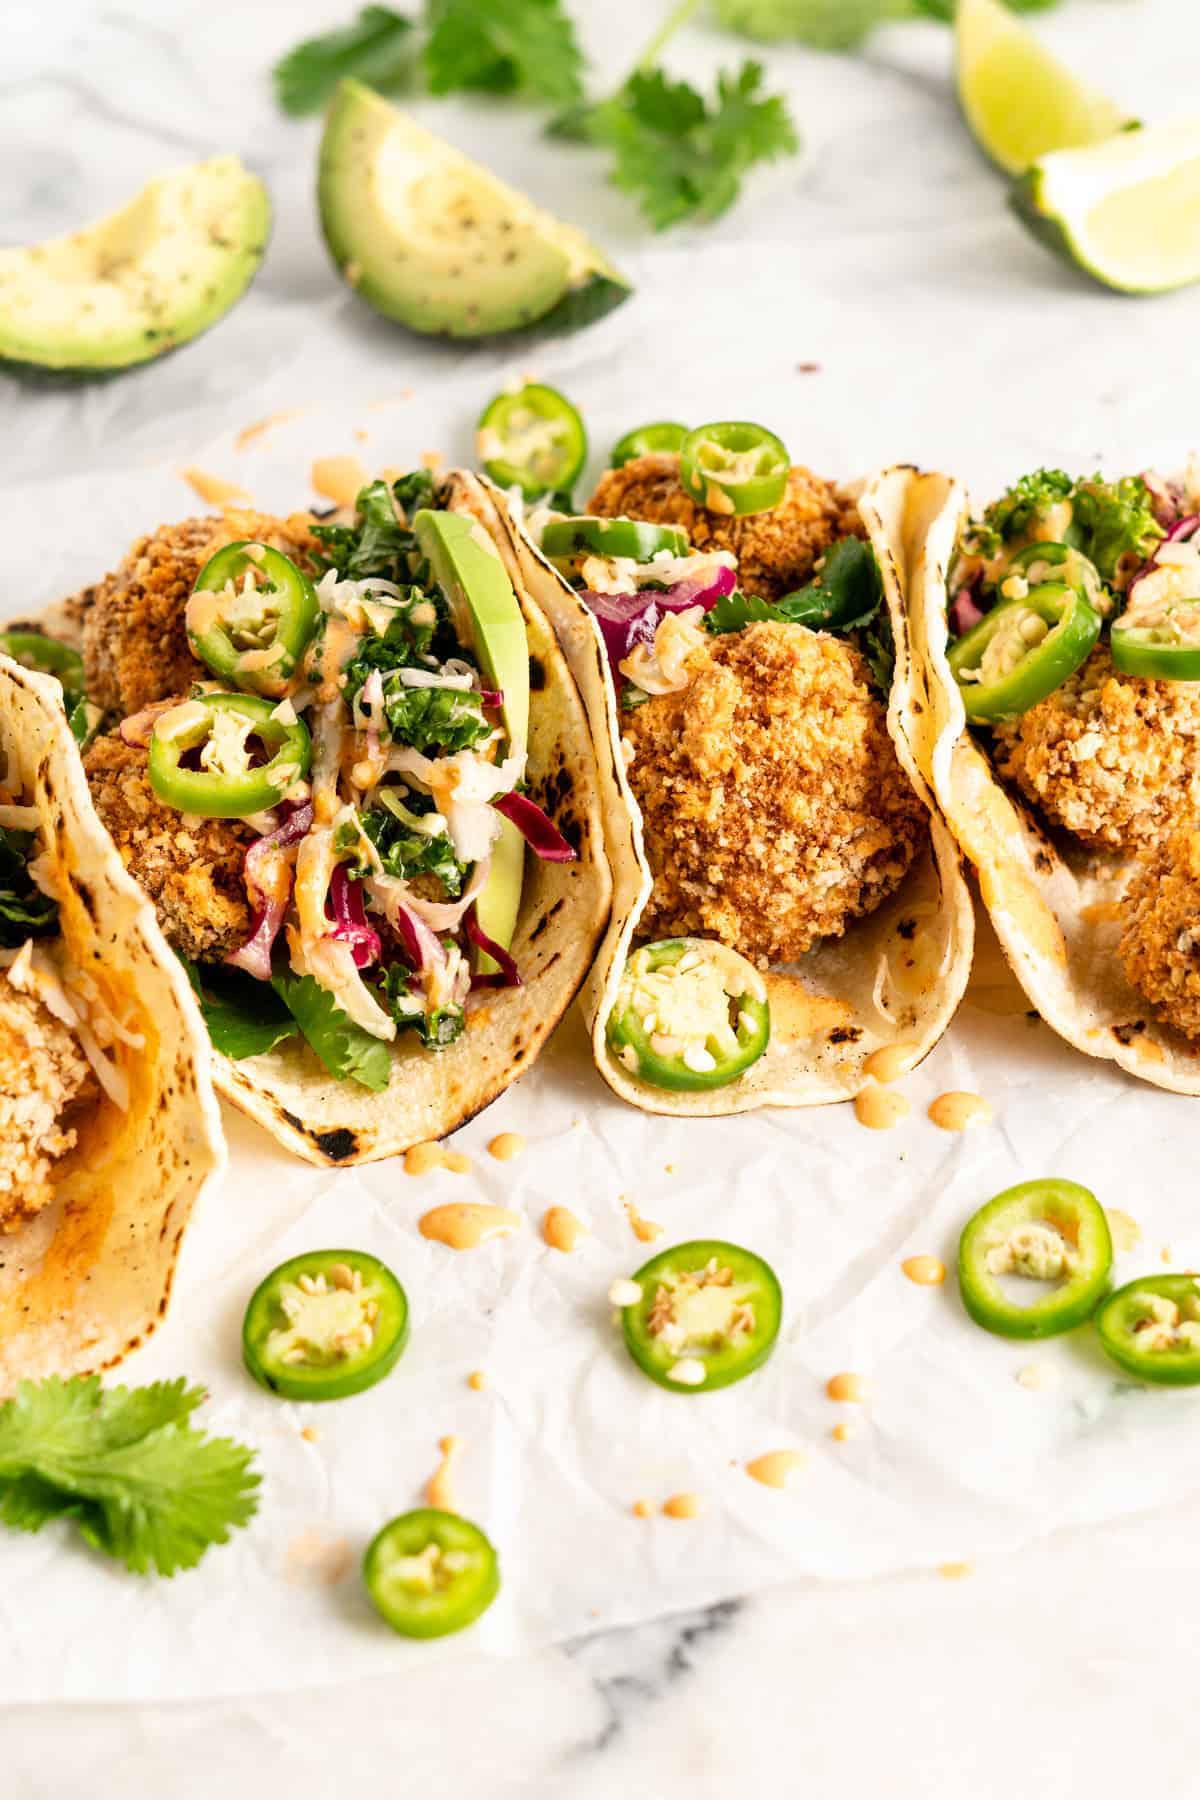 Side view of tacos filled with crispy breaded cauliflower, slaw, and sliced jalapenos